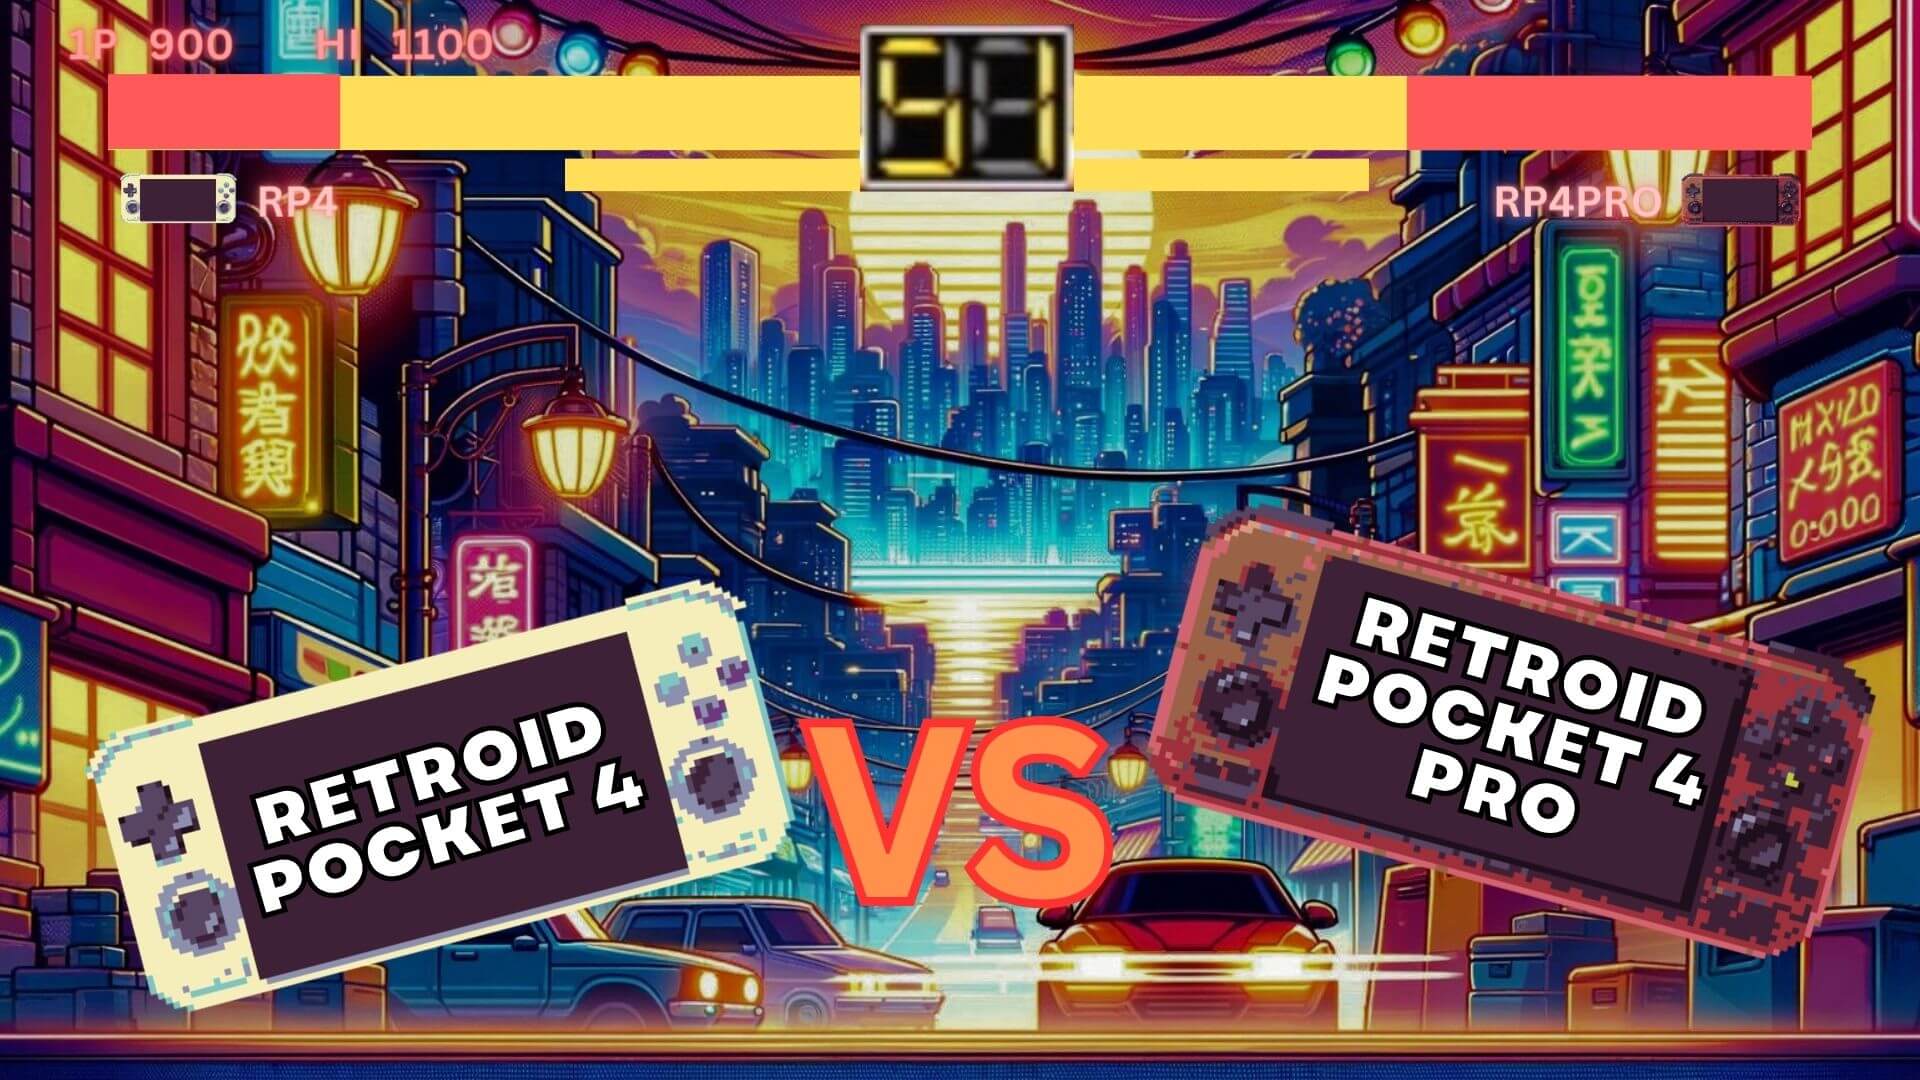 Retroid Pocket 4 vs Retroid Pocket 4 PRO with video – Which has the best price versus performance?